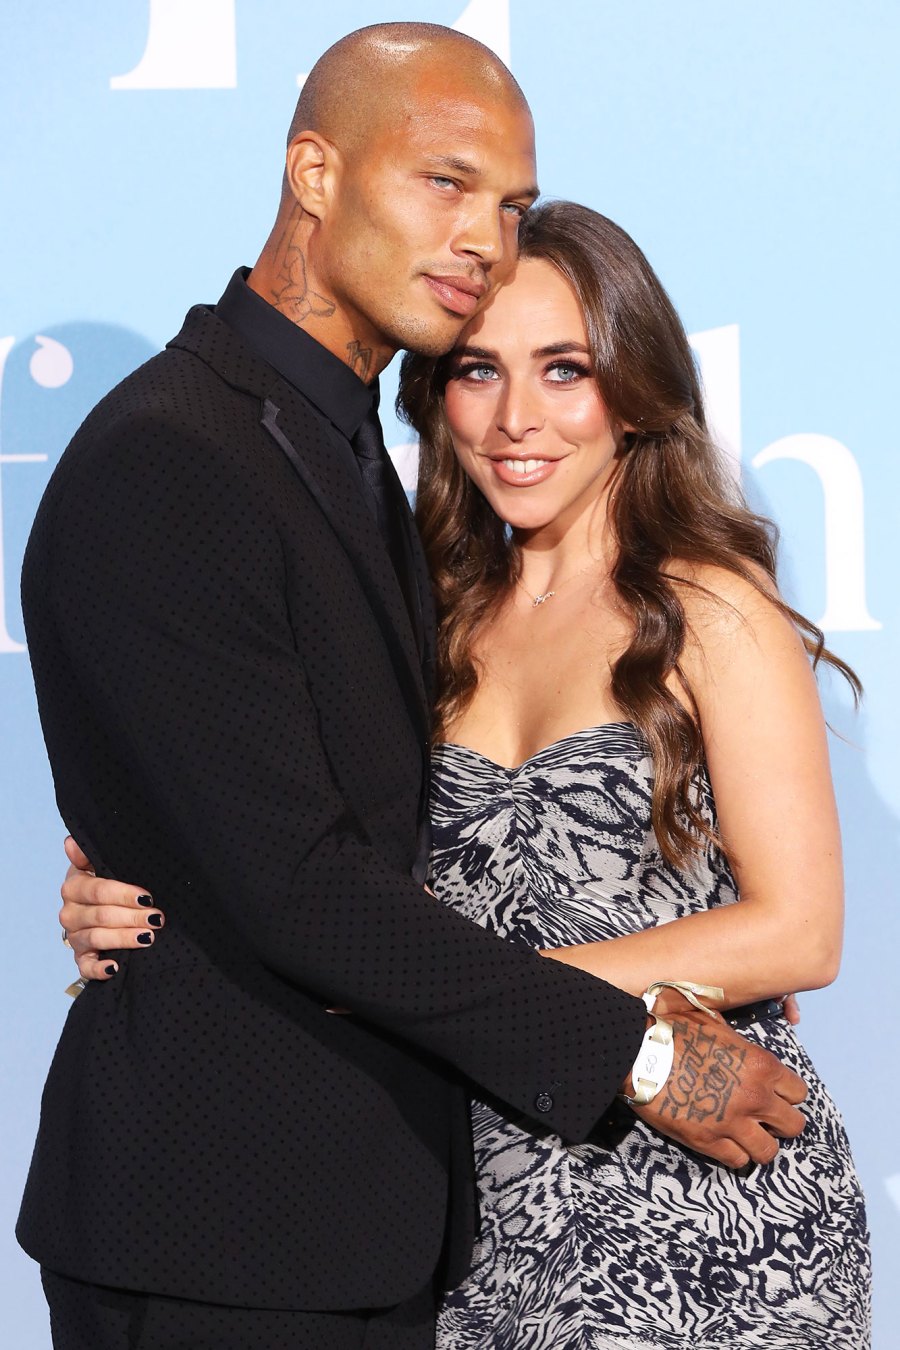 Jeremy Meeks And Chloe Green A Timeline Of Their Relationship